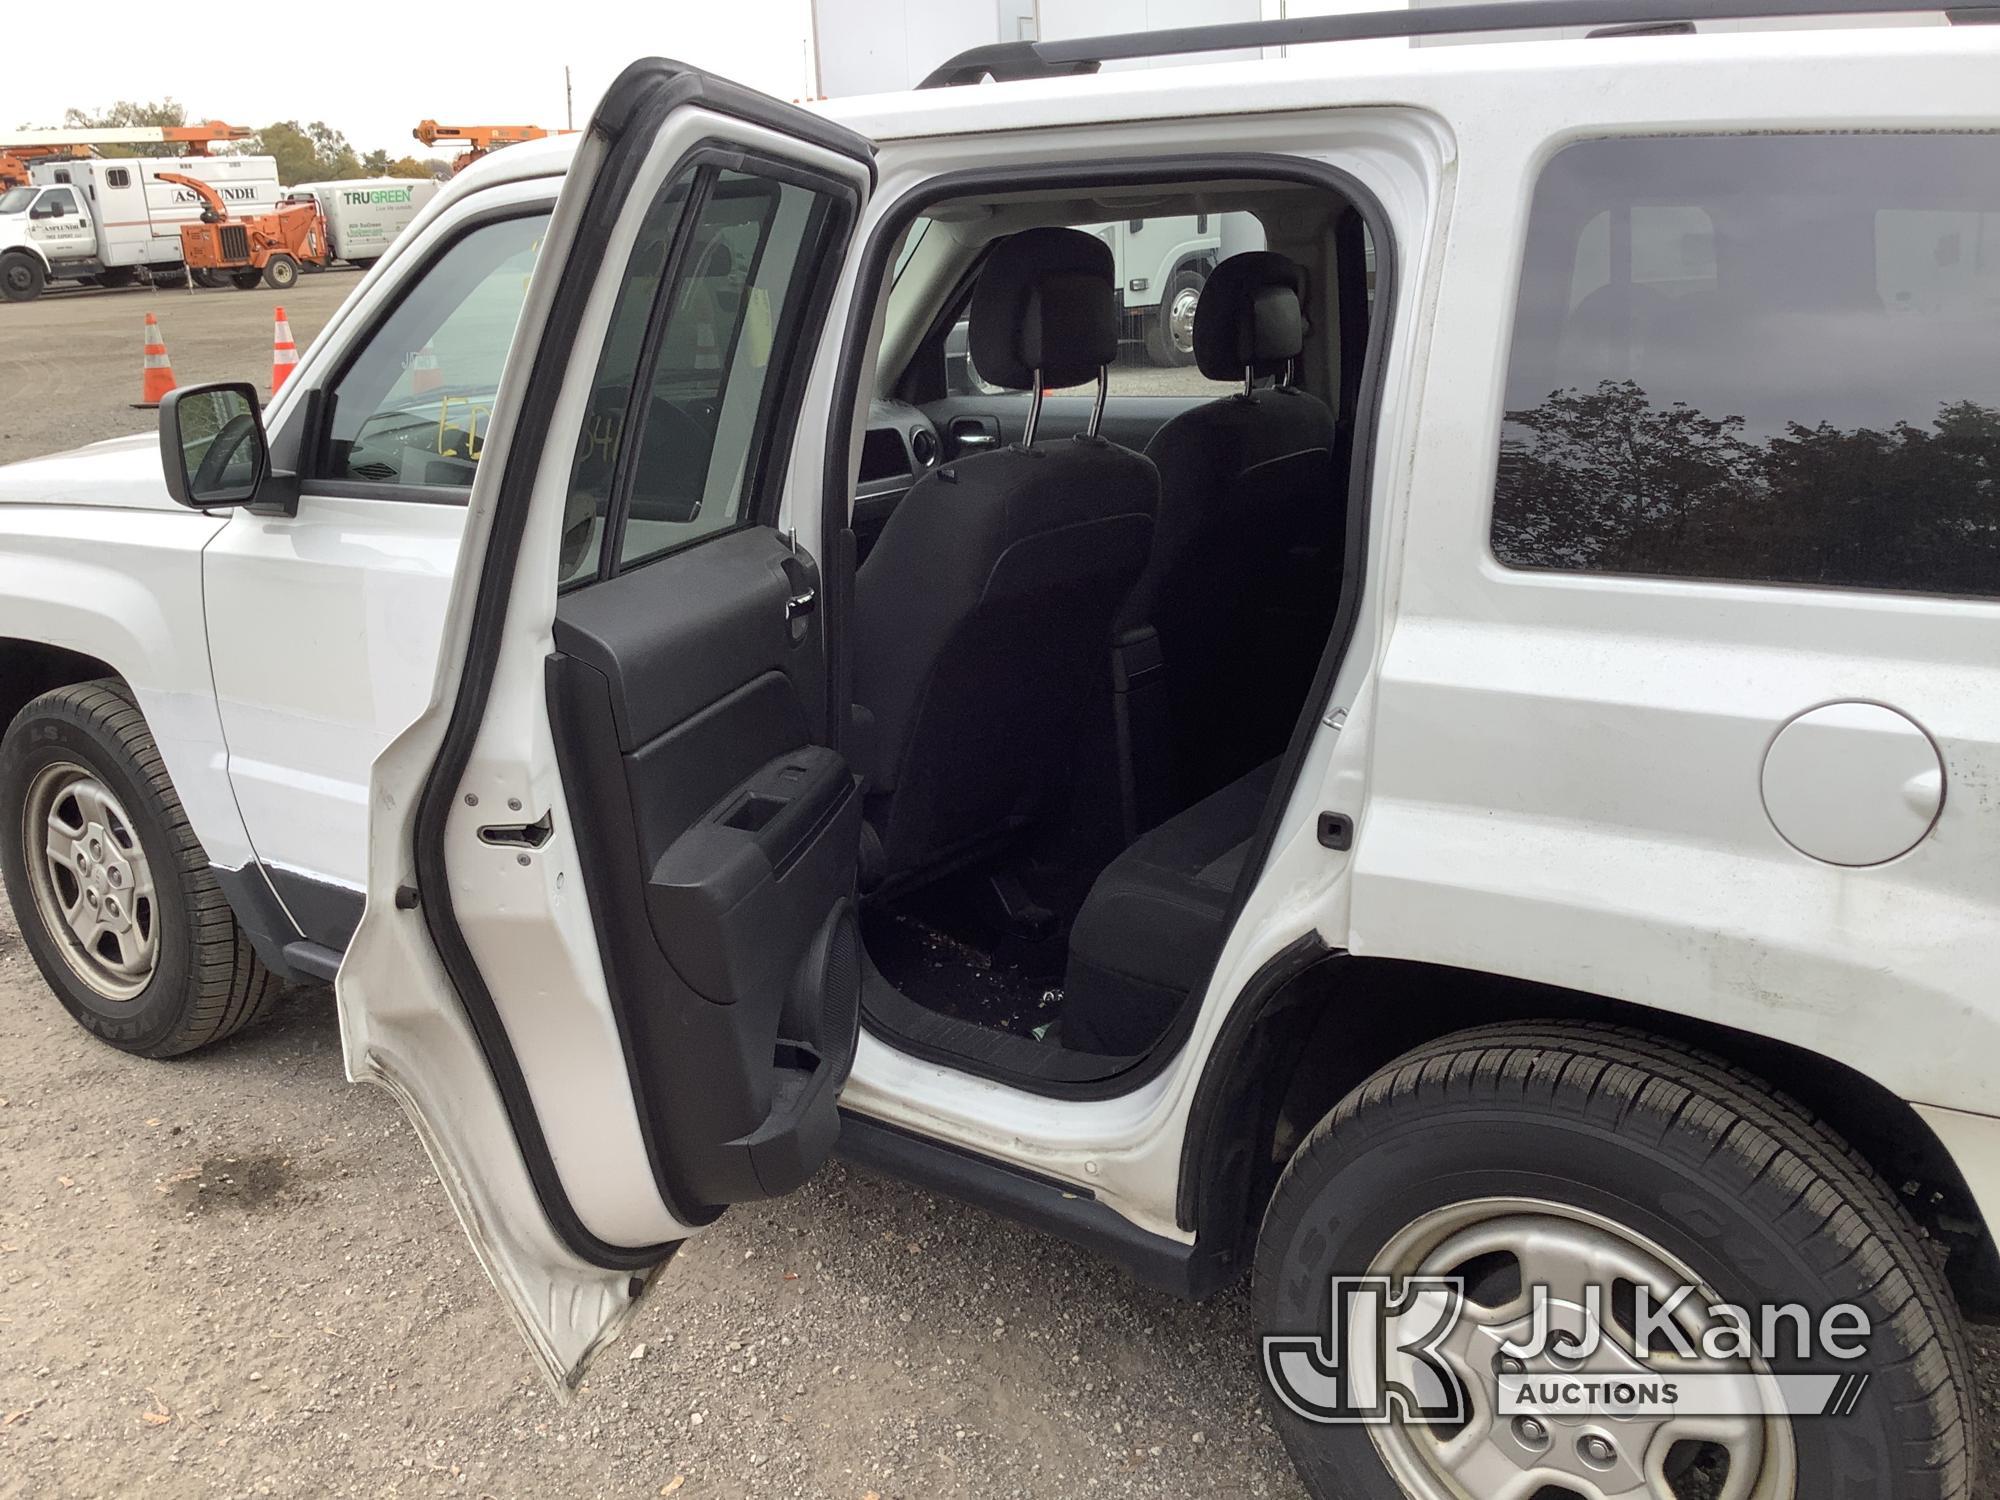 (Plymouth Meeting, PA) 2014 Jeep Patriot 4-Door Sport Utility Vehicle Runs & Moves, Body & Rust Dama